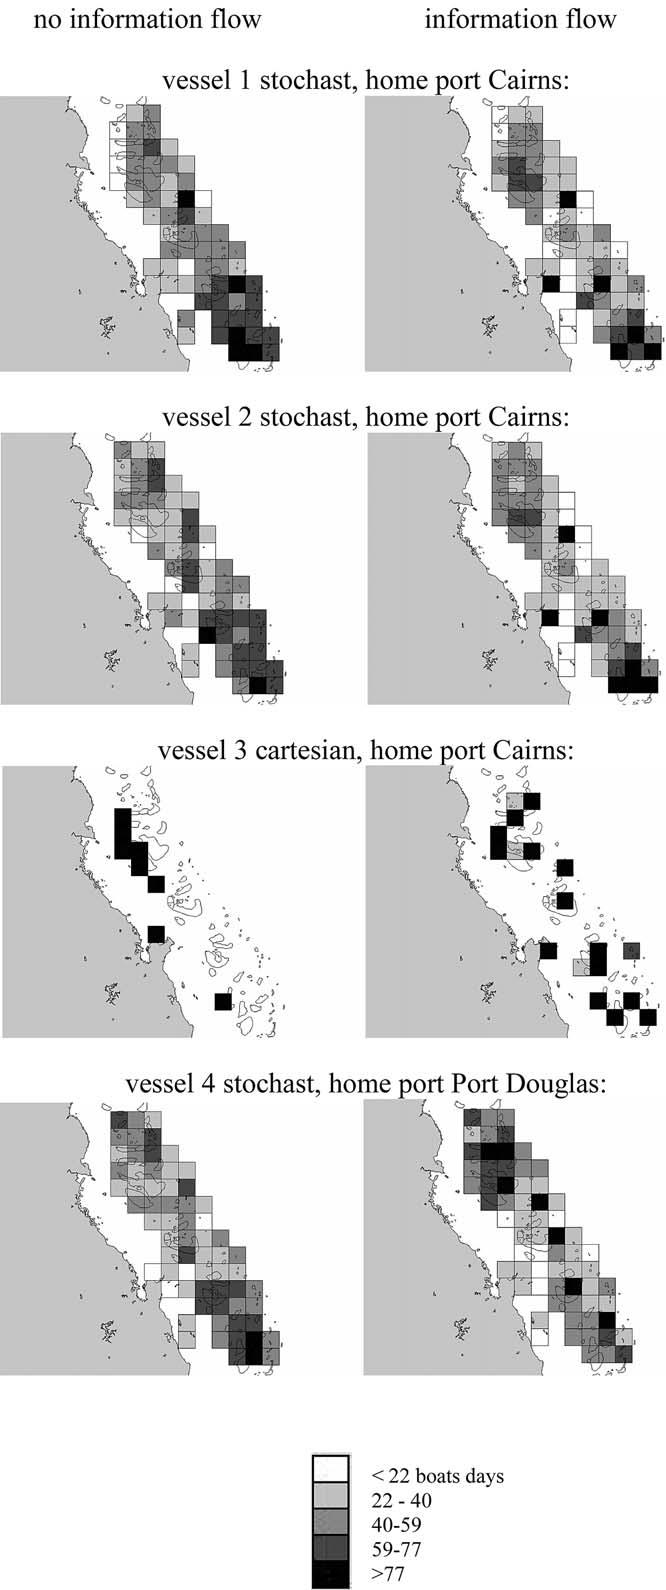 Available biomass on reefs (shading of reefs) (a) in 1998, and in 2025 with projected effort in the last ten years of the projection period (2016 2025, shading of grid cells) under (b) no